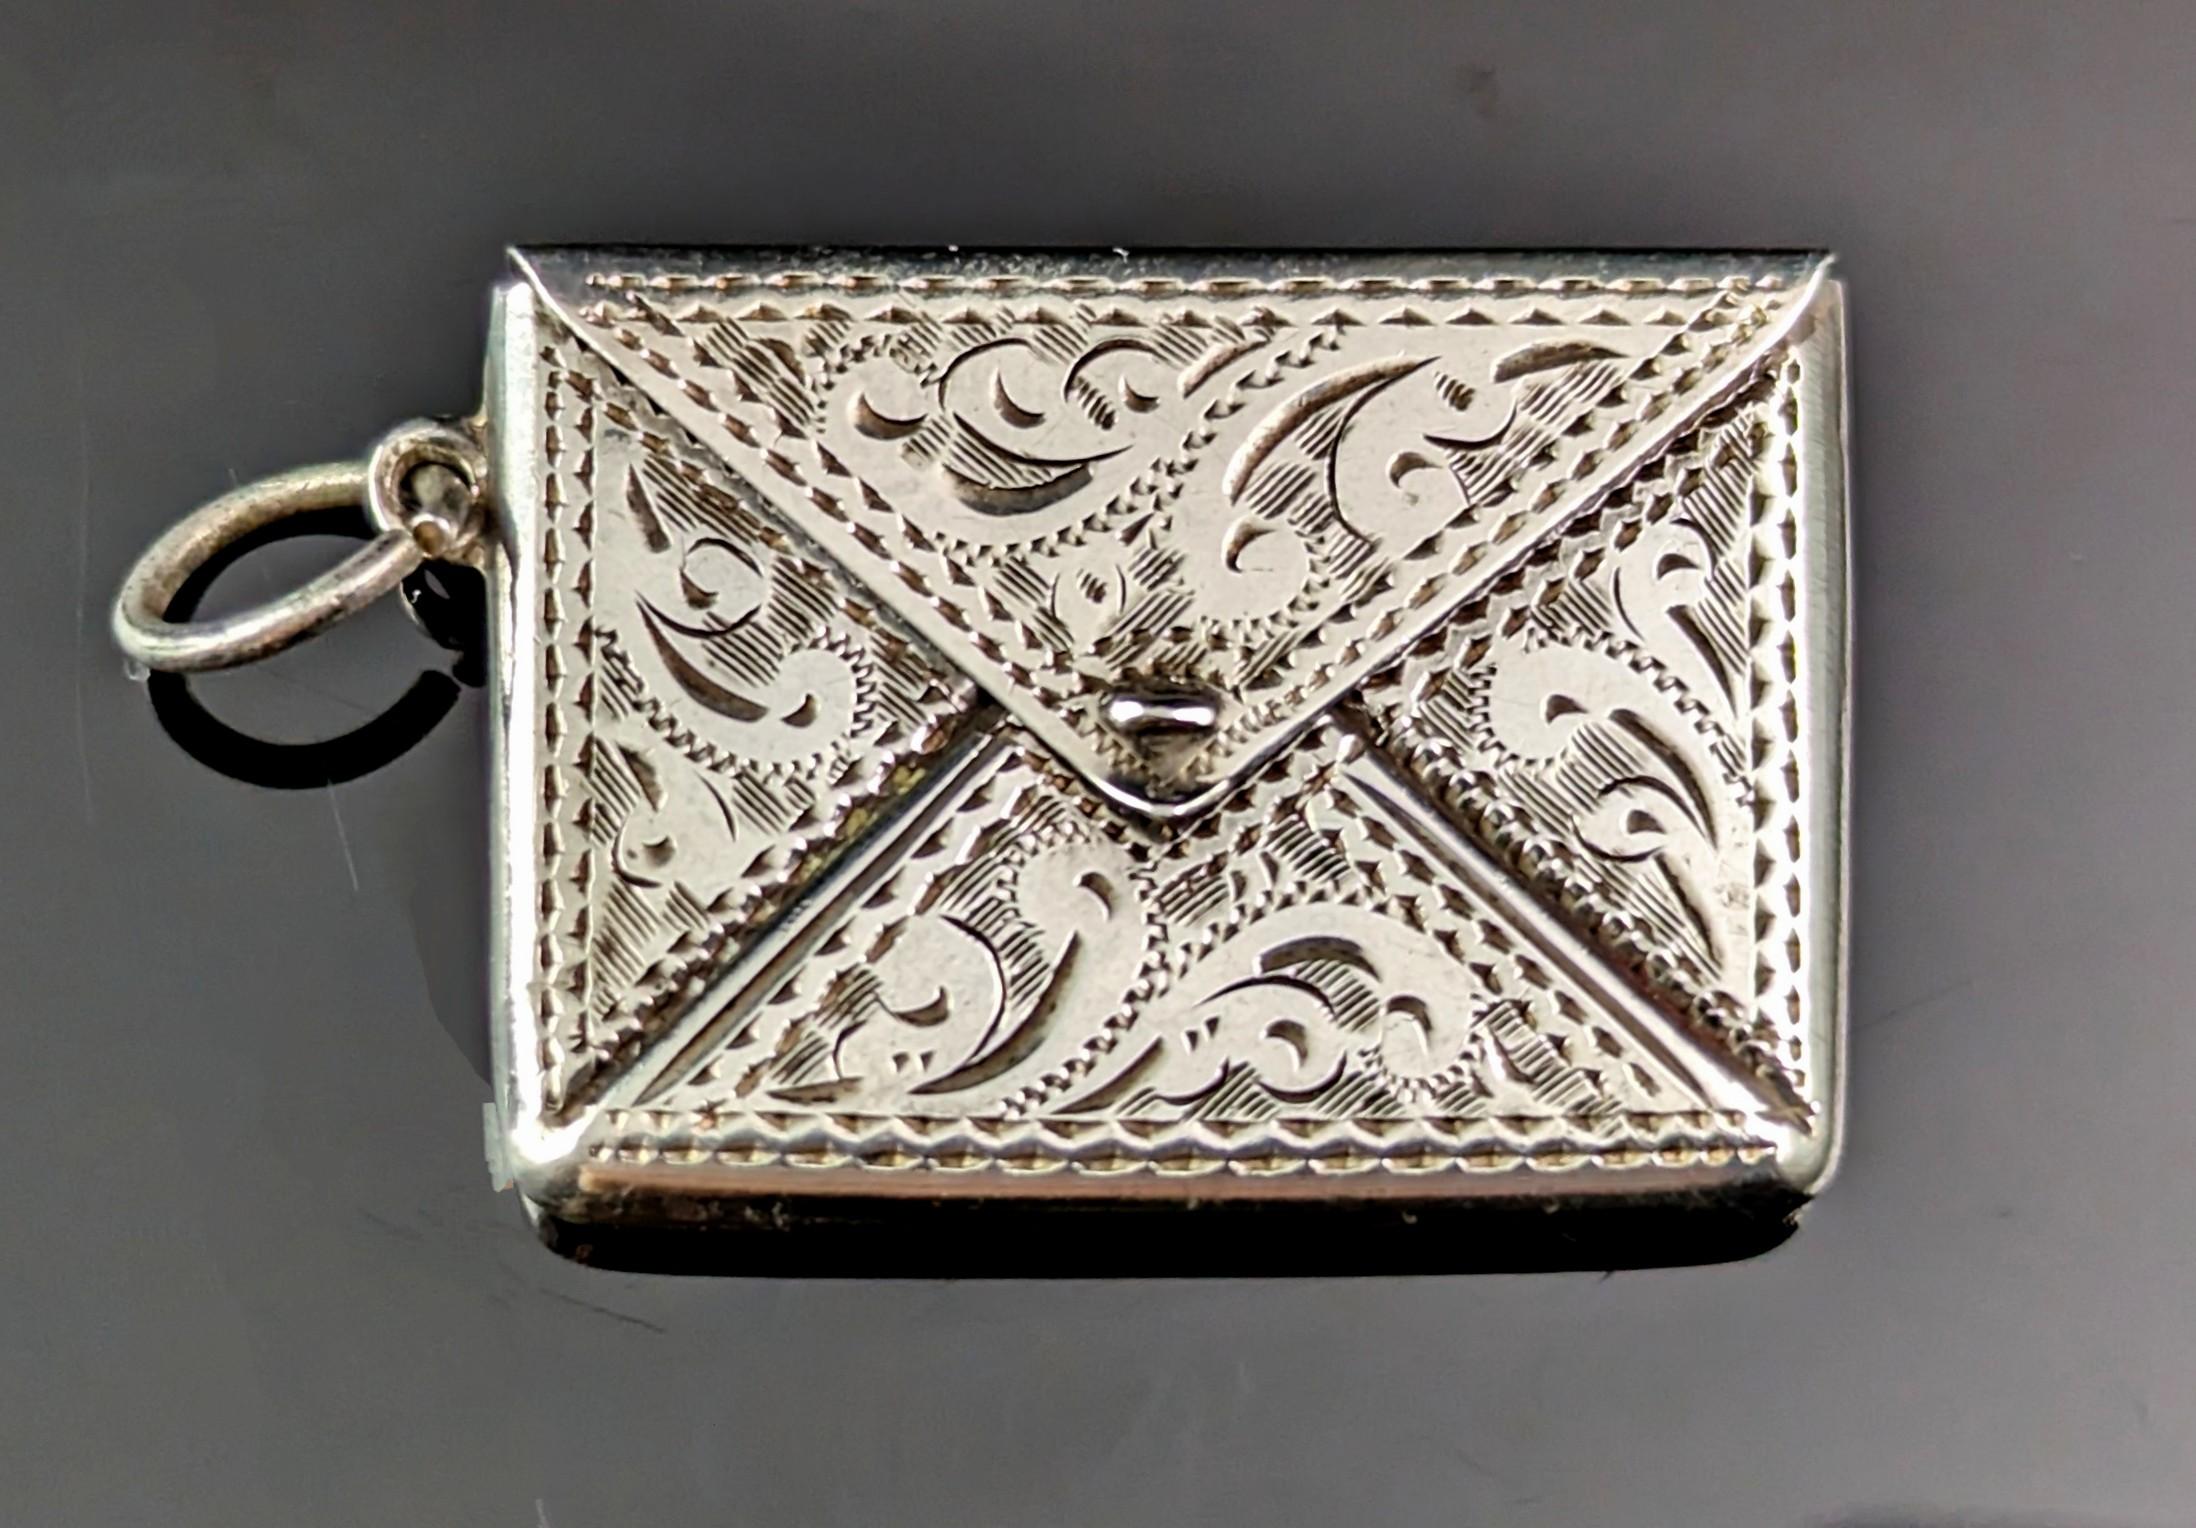 Such a charming and attractive antique sterling silver stamp case pendant.

This pretty stamp case is designed as an envelope with a small compartment for holding postage stamps, these are such wonderful little pieces full of character and